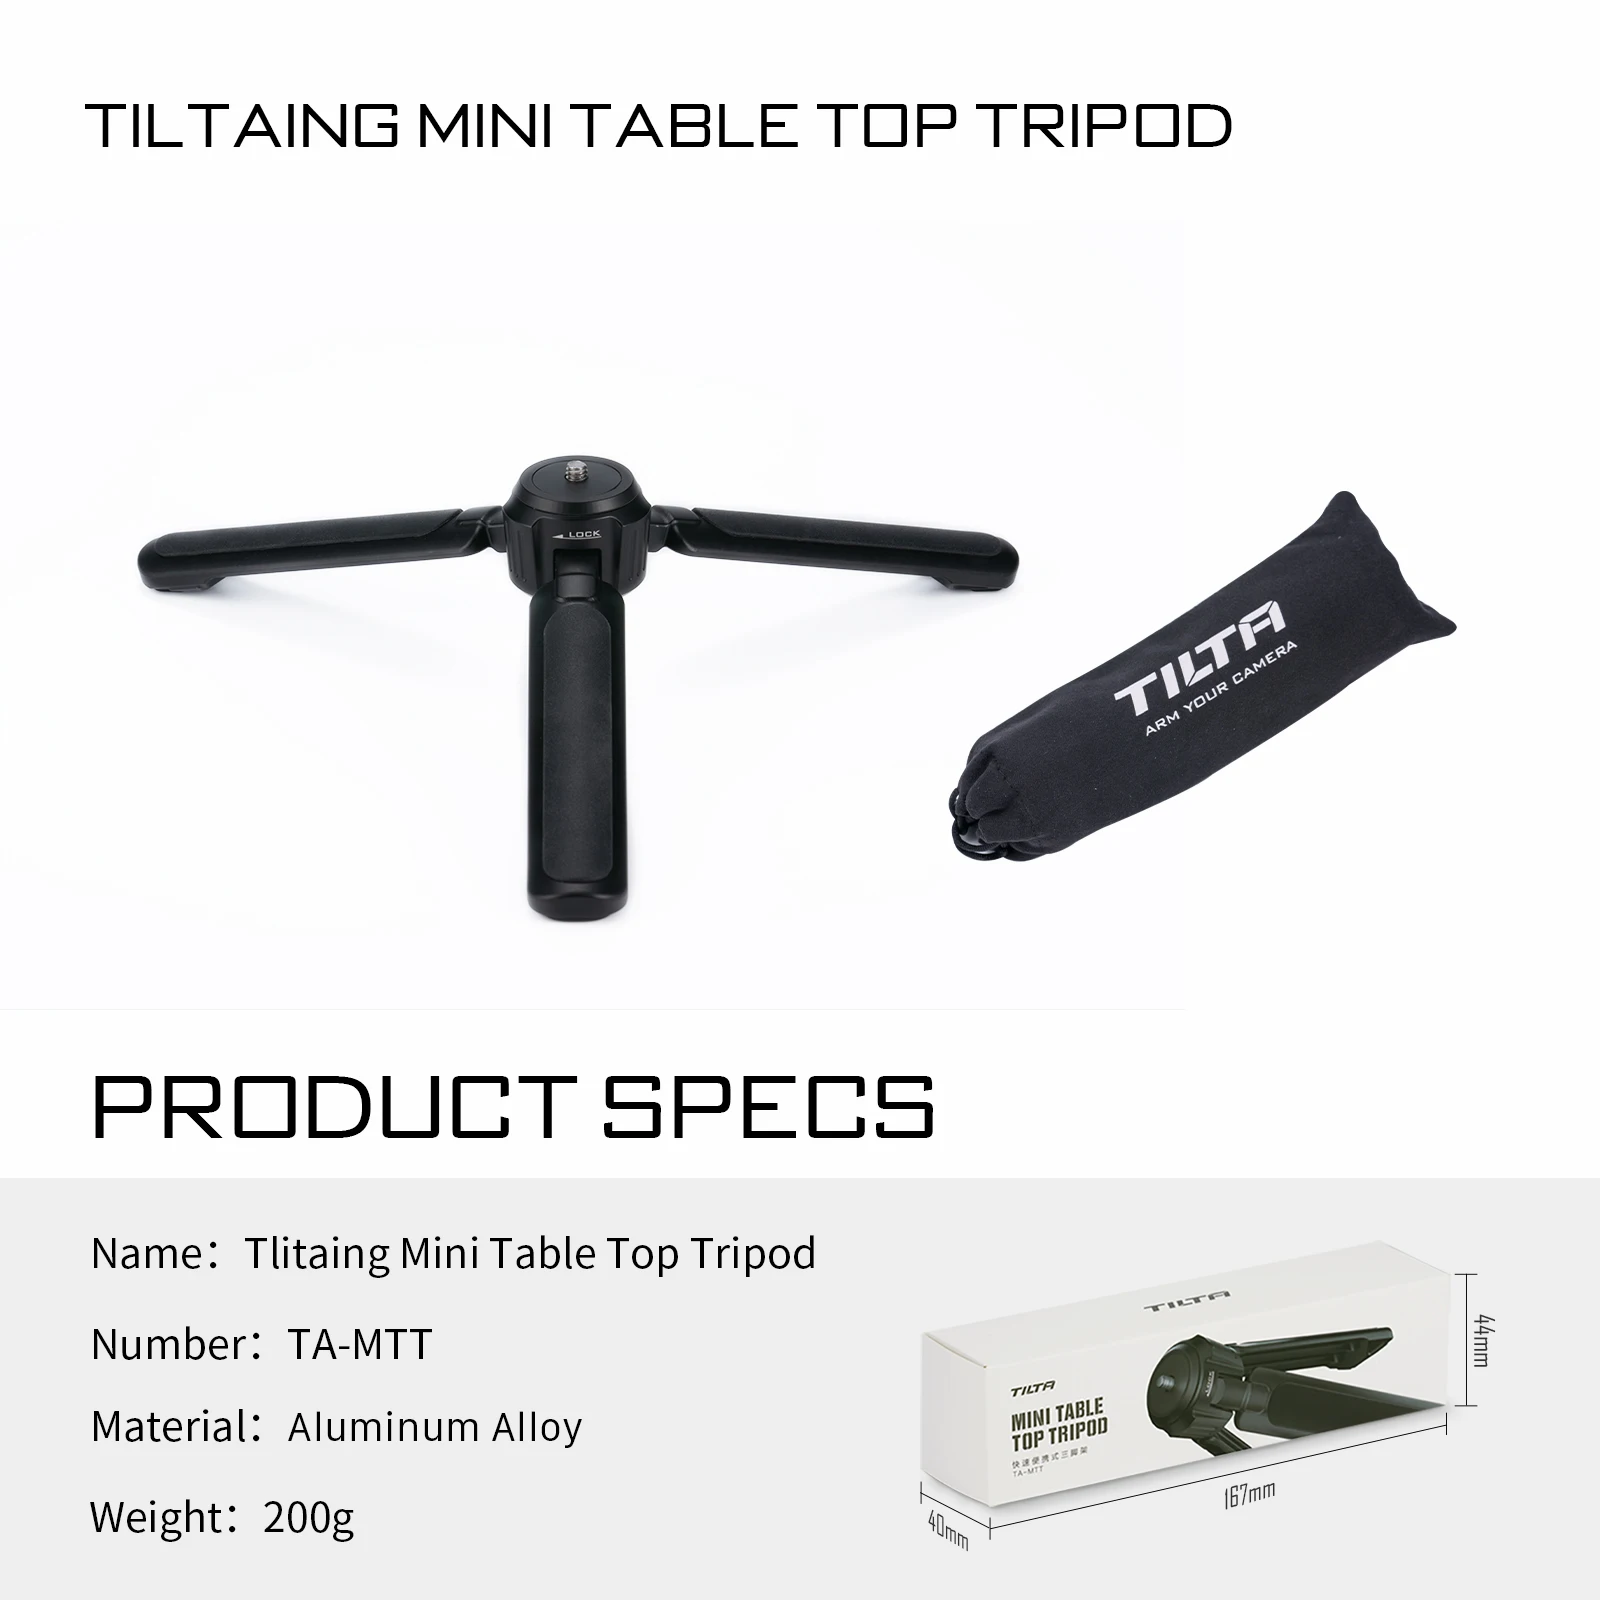 

TILTA Mini Table Top Tripod TA-MTT For Compact DSLR/for Phone/Mobile For Gopro Camera Tripods Lightweight